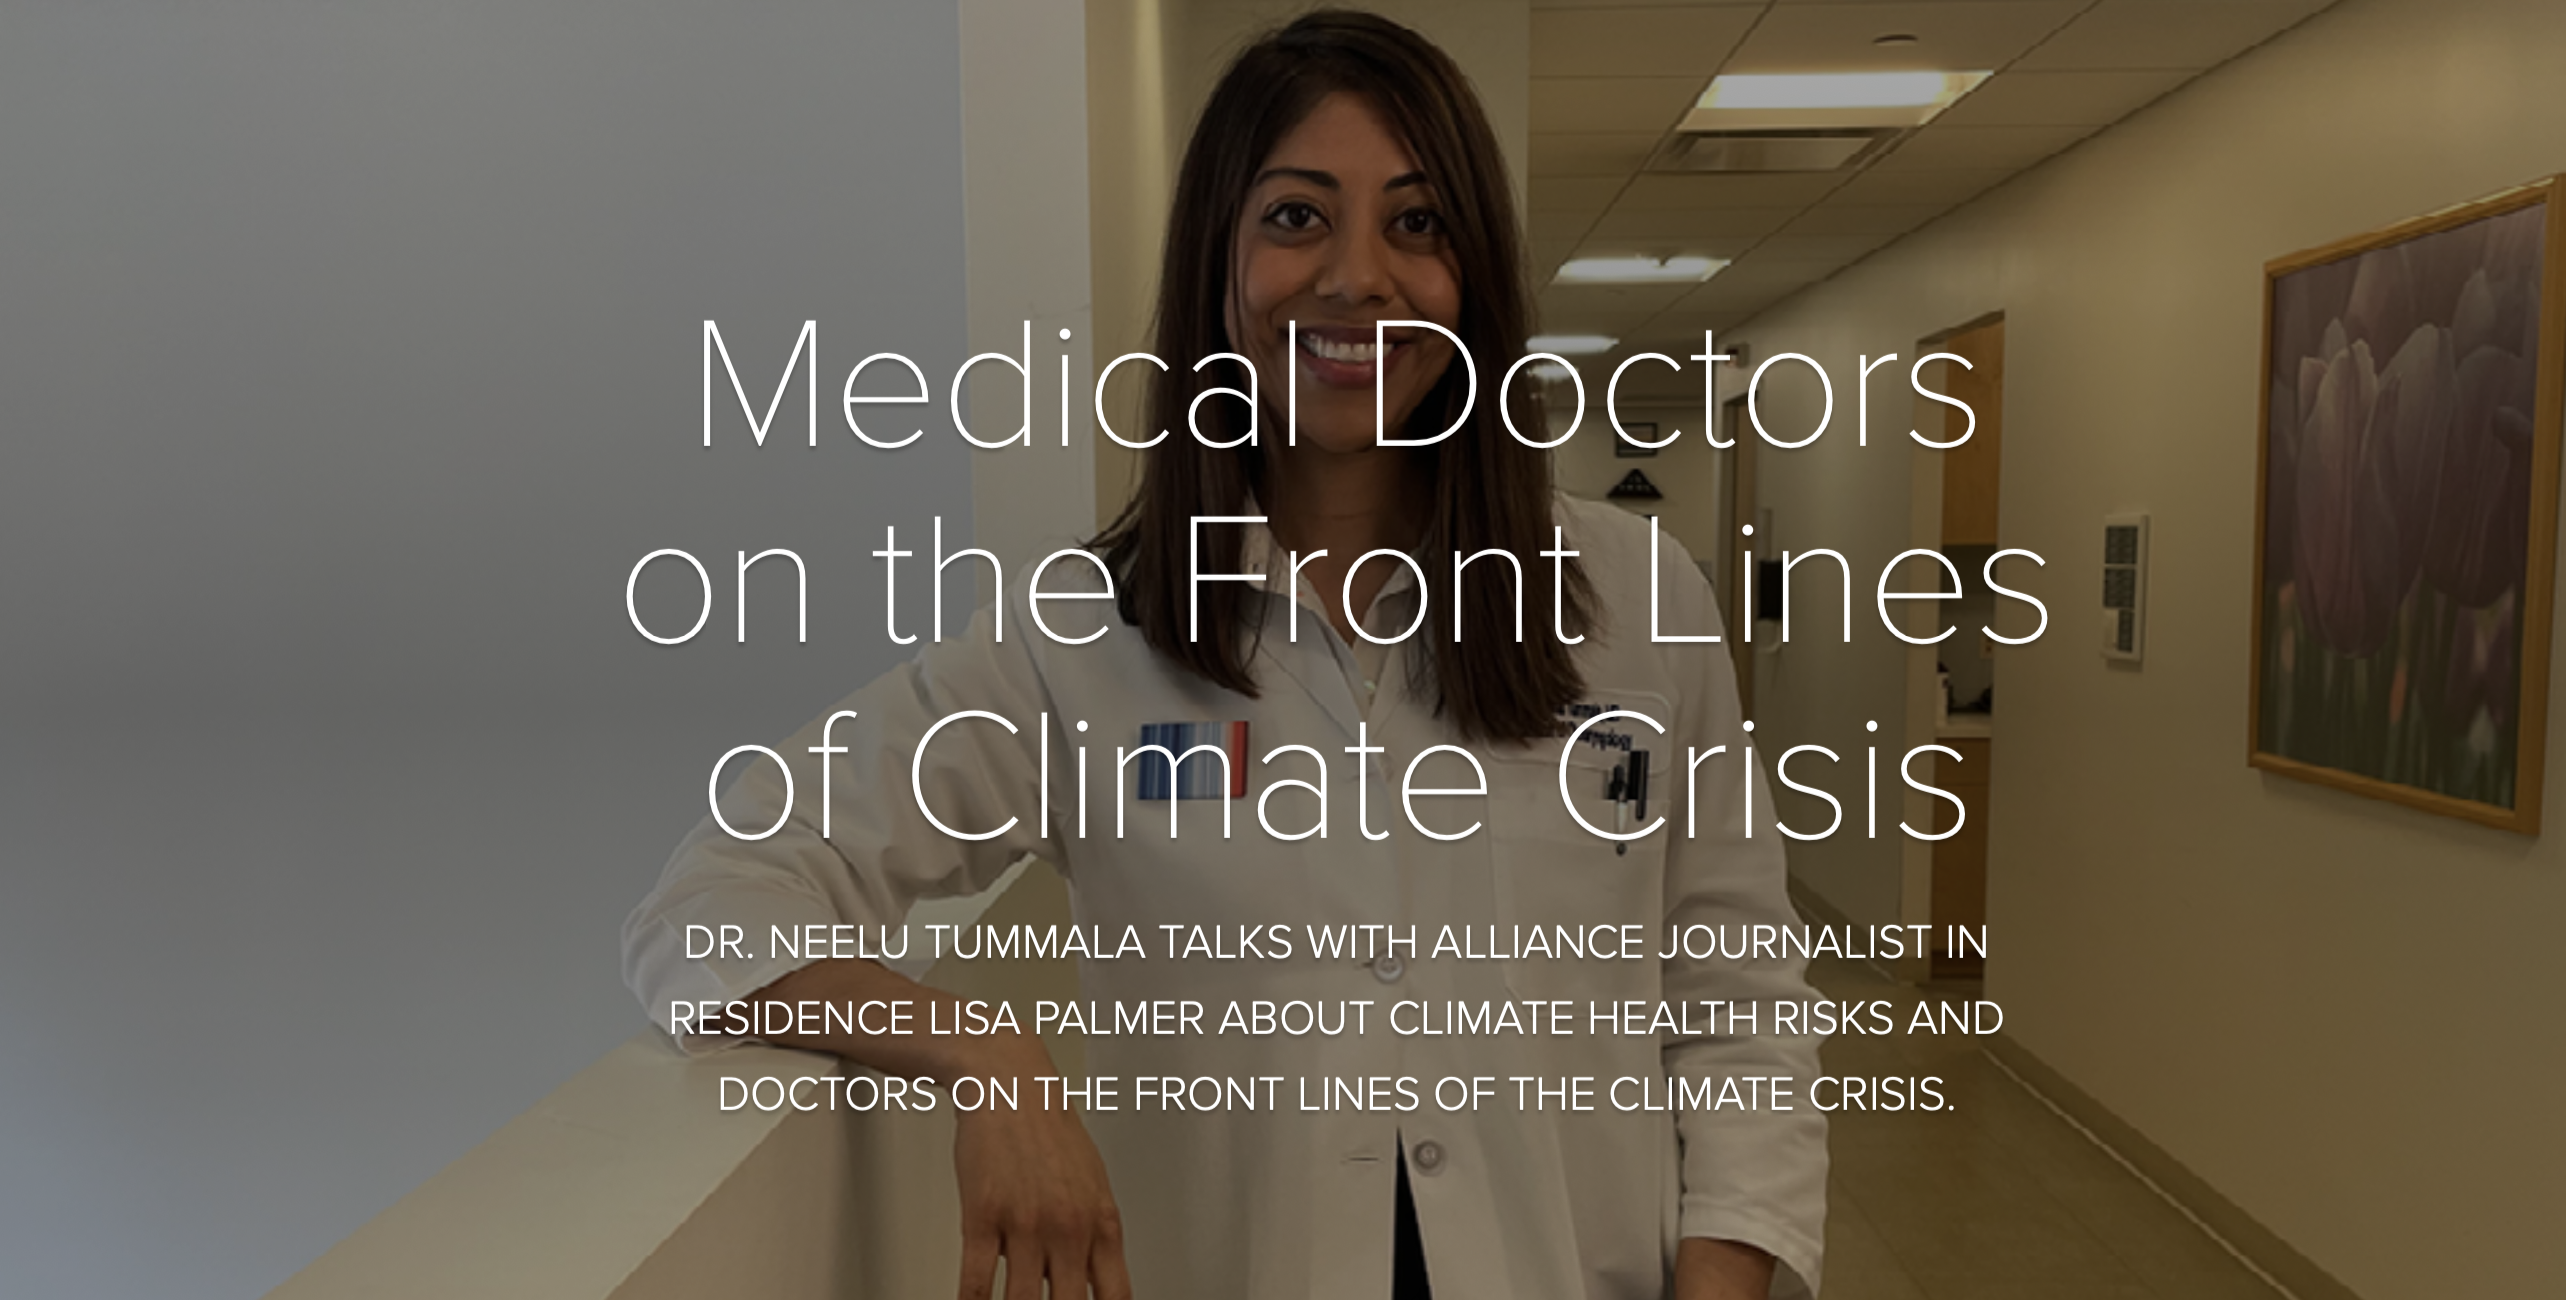 A picture of Dr. Neelima Tummala with the text "Medical doctors on the front lines of climate crisis, Dr. Neelu Tummala talks with Alliance Journalist in Residence Lisa Palmer about climate health risks and doctors on the front lines of the climate crisis."